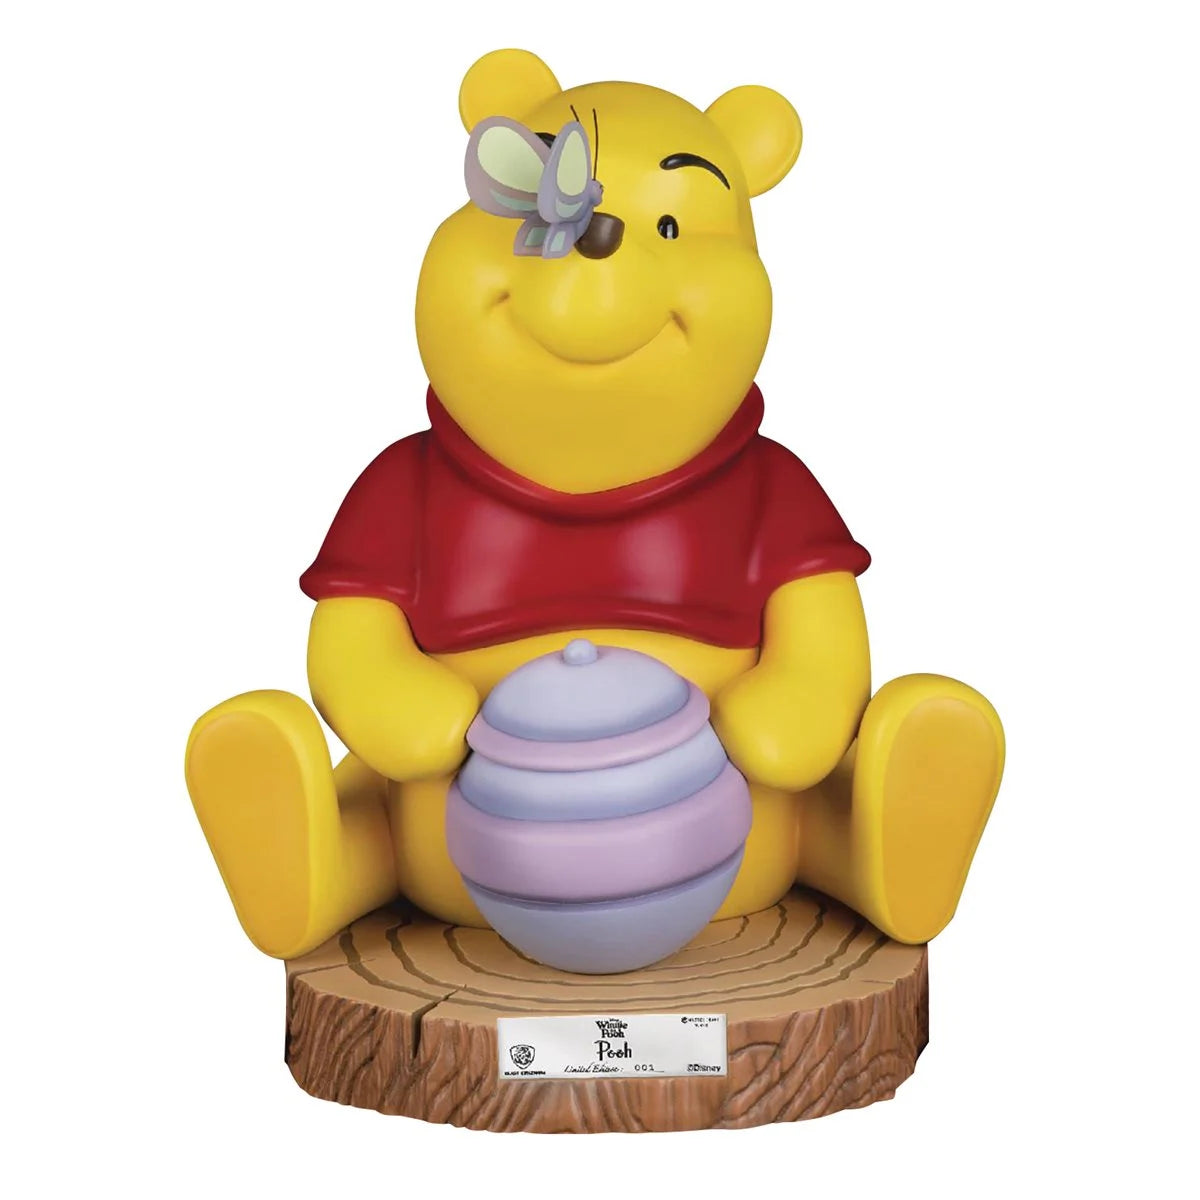 Enesco Disney Traditions Winnie the Pooh Carved by Heart Statue -  collectorzown